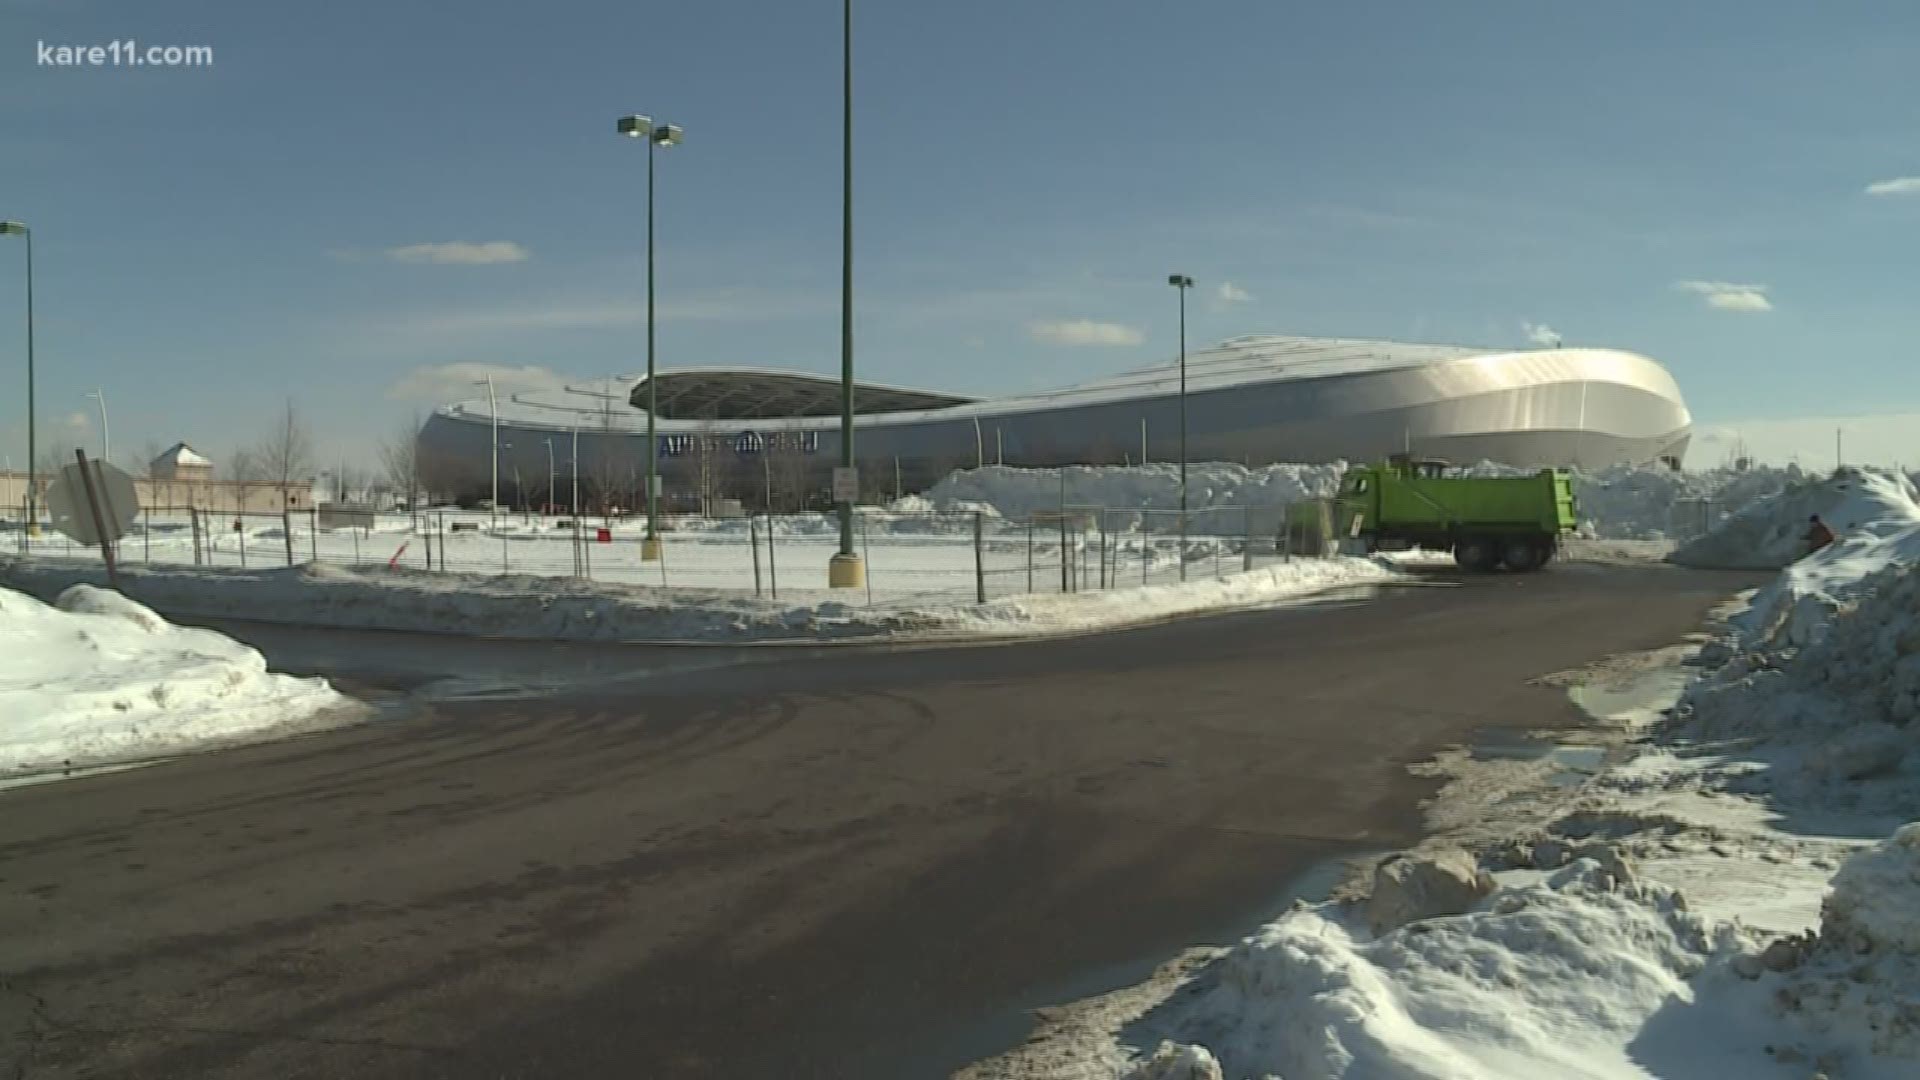 With the first game at Allianz Field coming up in one month, some bars have already changed hands, while the futures of others are in limbo. https://kare11.tv/2EQtET1